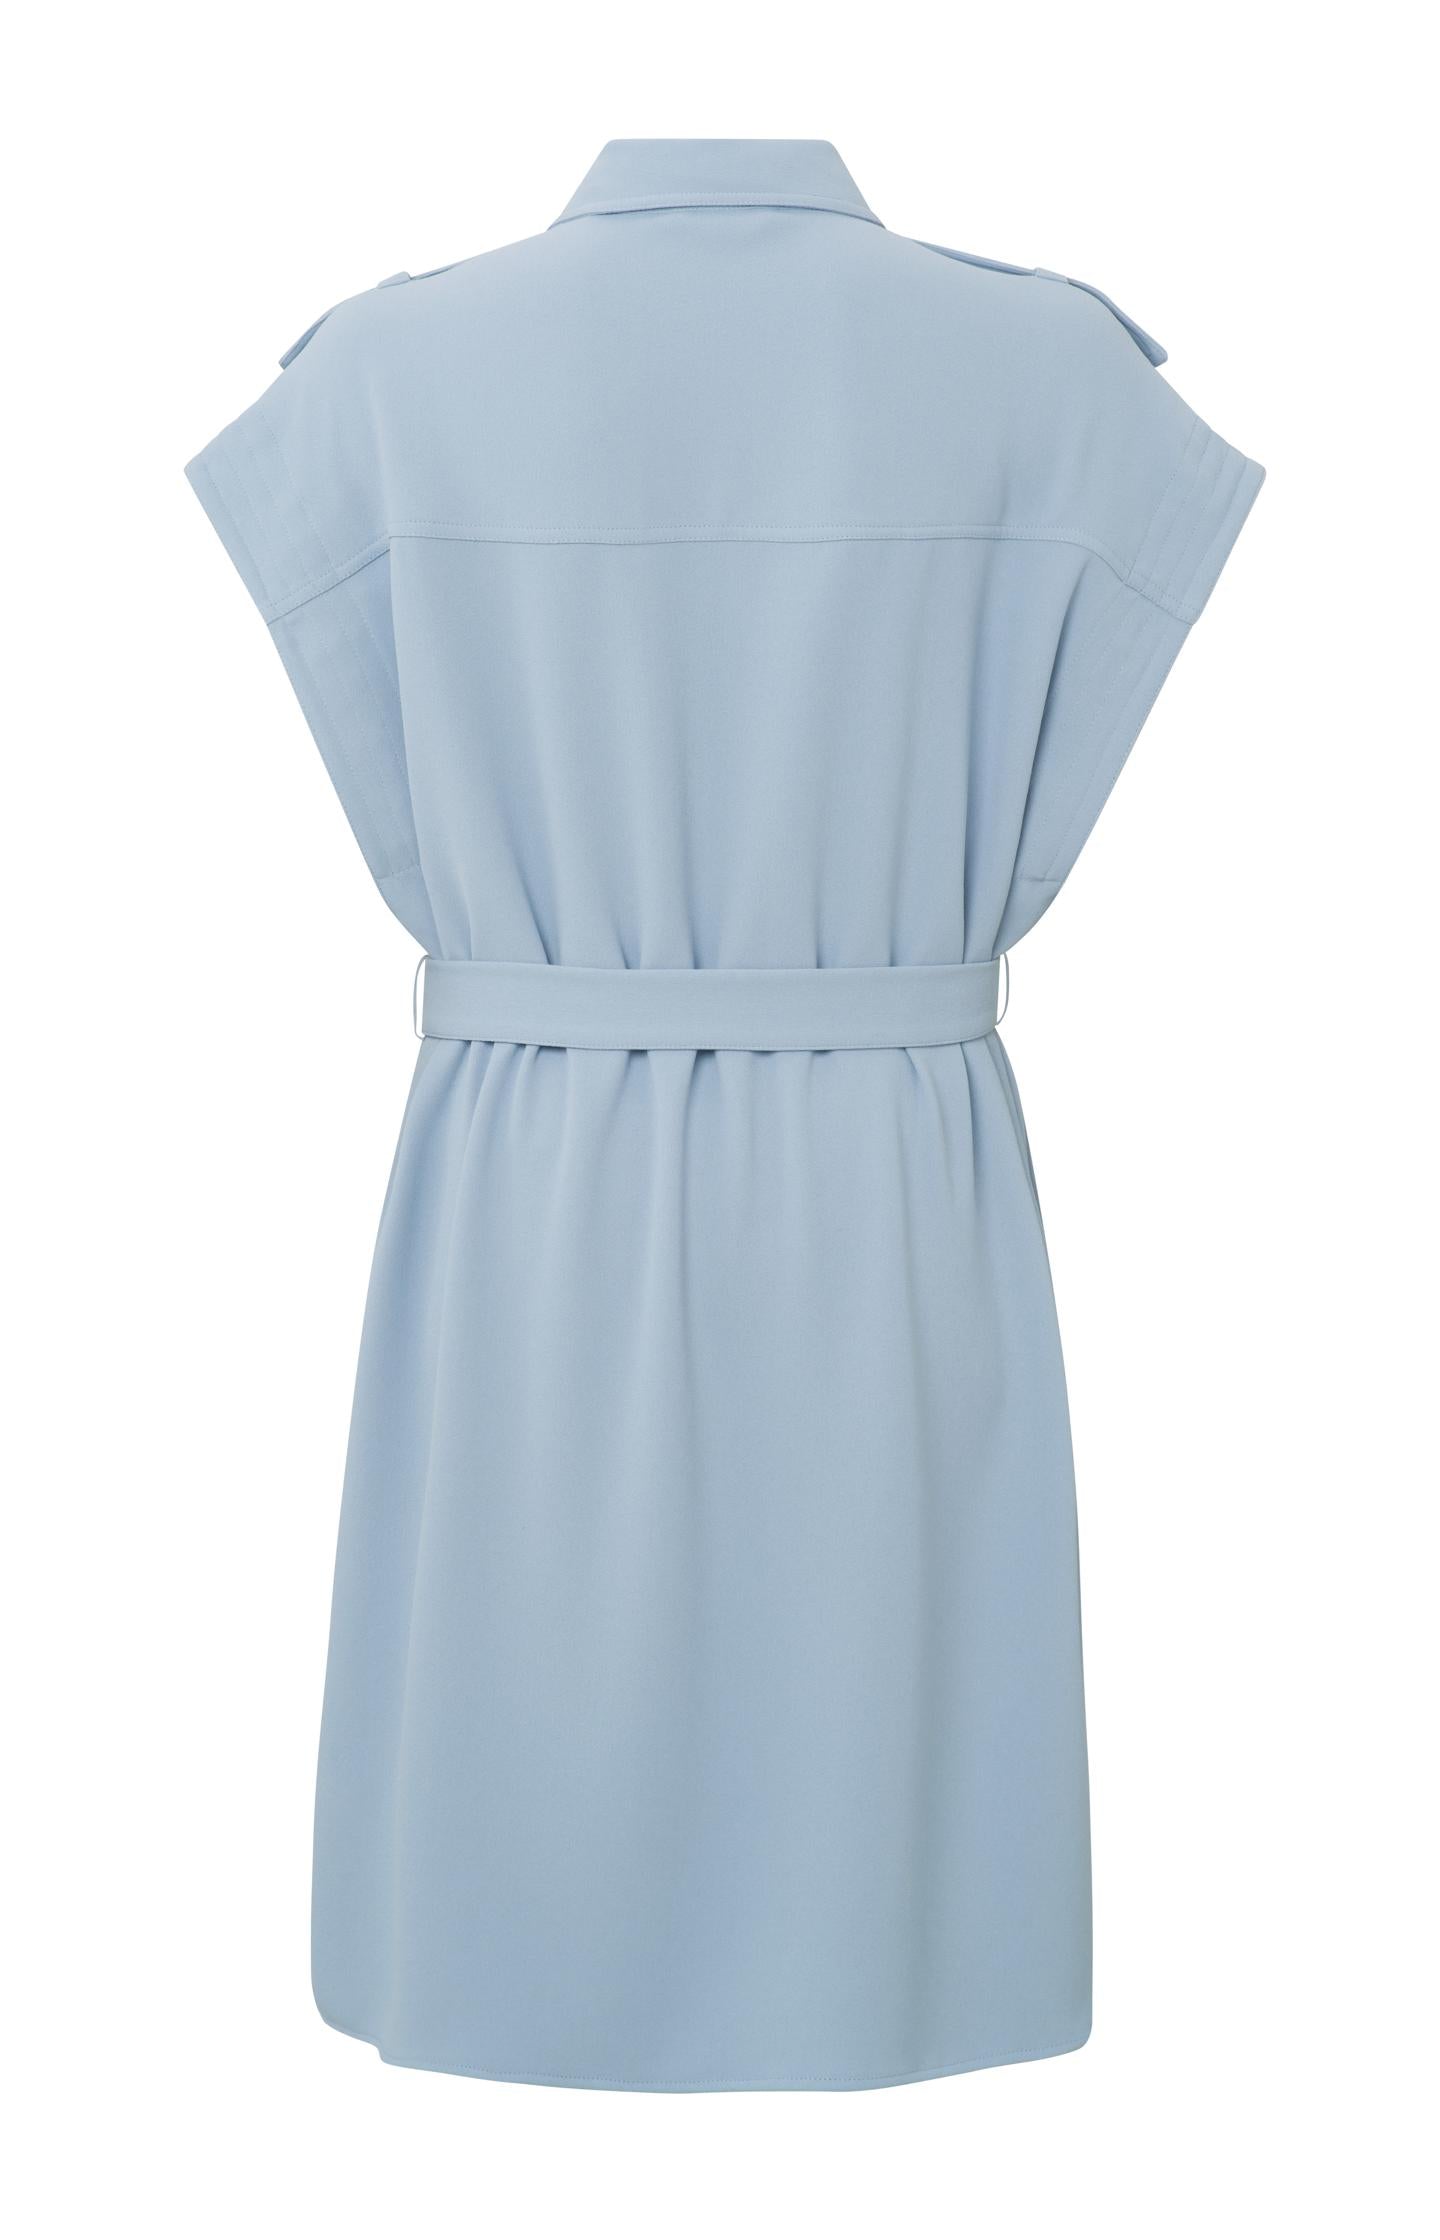 Sleeveless dress with pockets, buttons and shoulder details